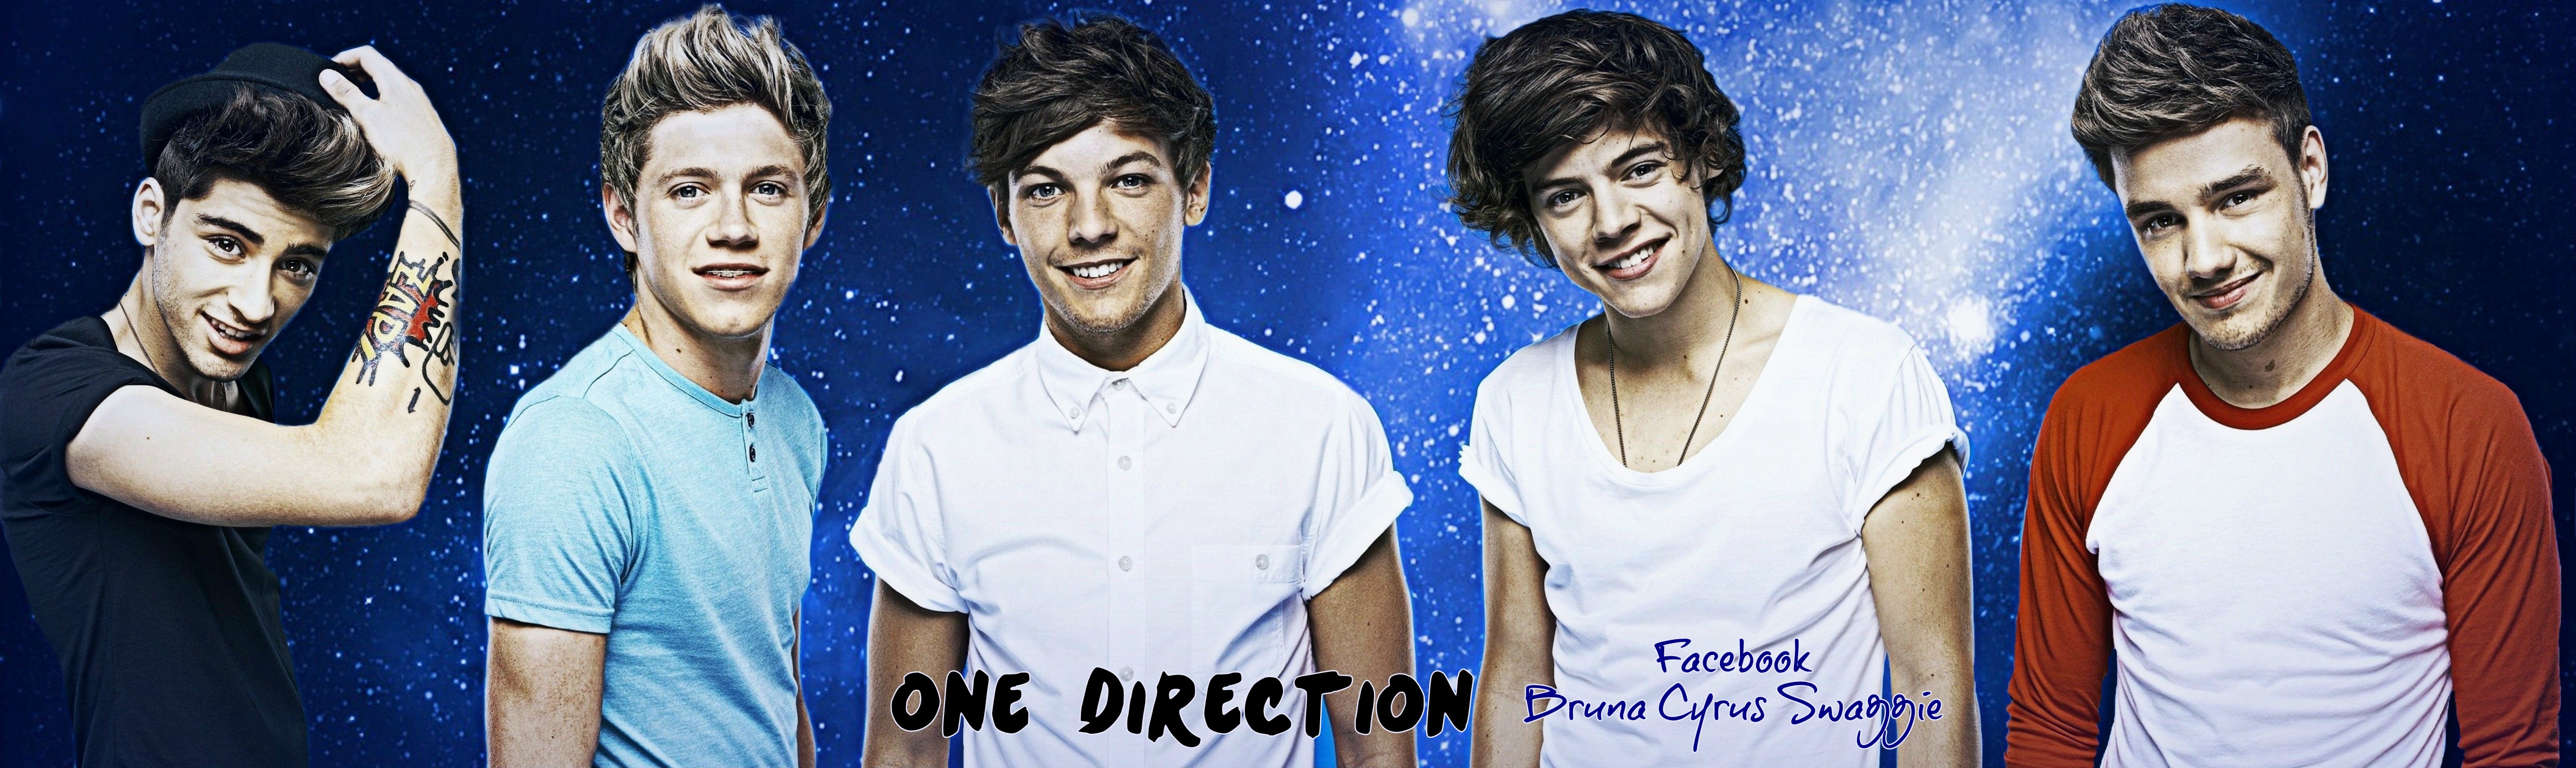 One Direction Cover S Louis Tomlinson Fan Art